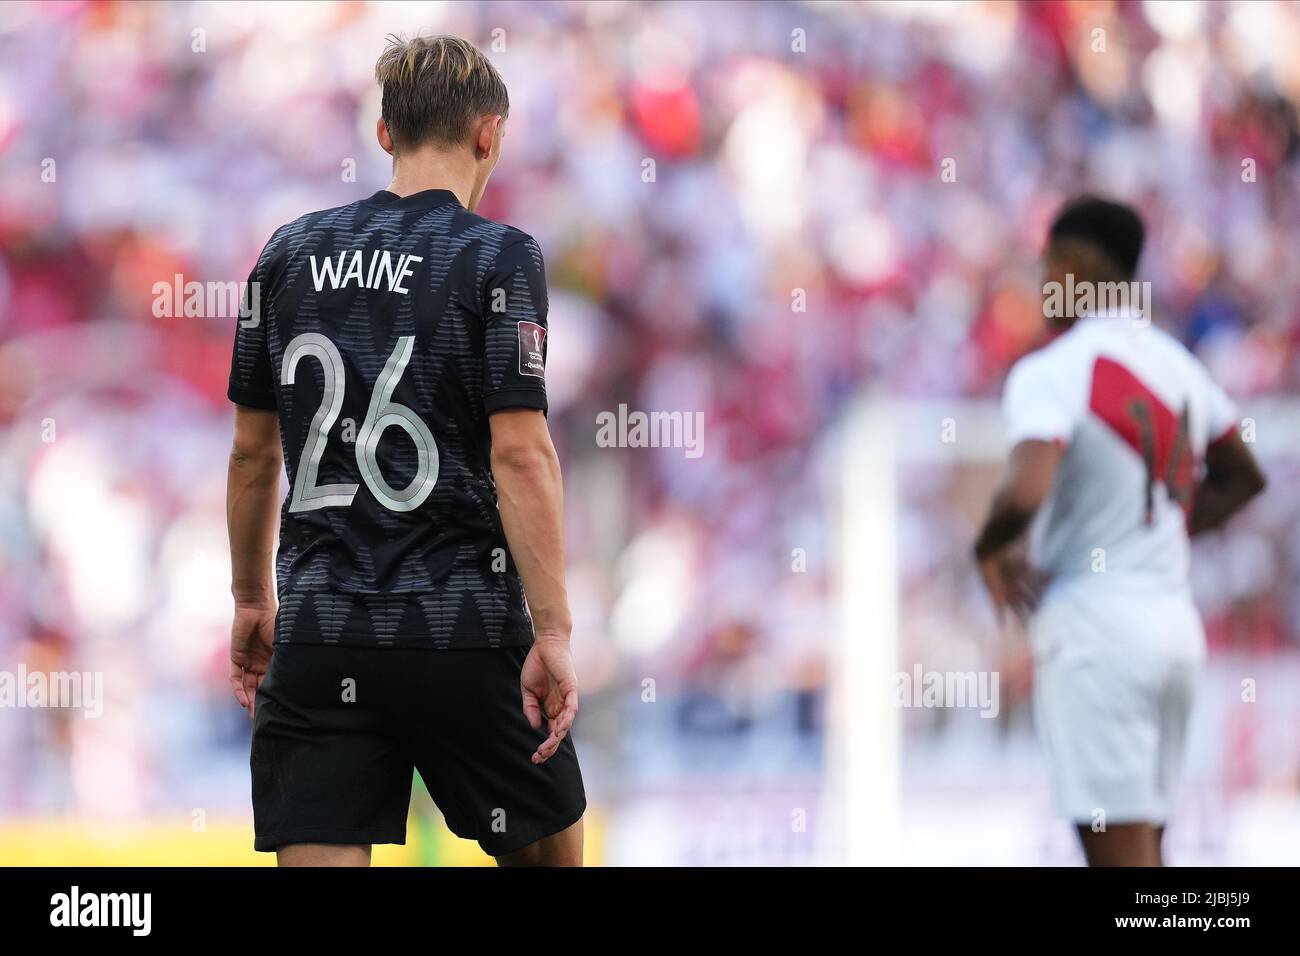 Ben Waine of New Zealand during the friendly match between Peru and New Zealand played at RCDE Stadium on June 5, 2022 in Barcelona, Spain. (Photo by Bagu Blanco / PRESSINPHOTO) Stock Photo